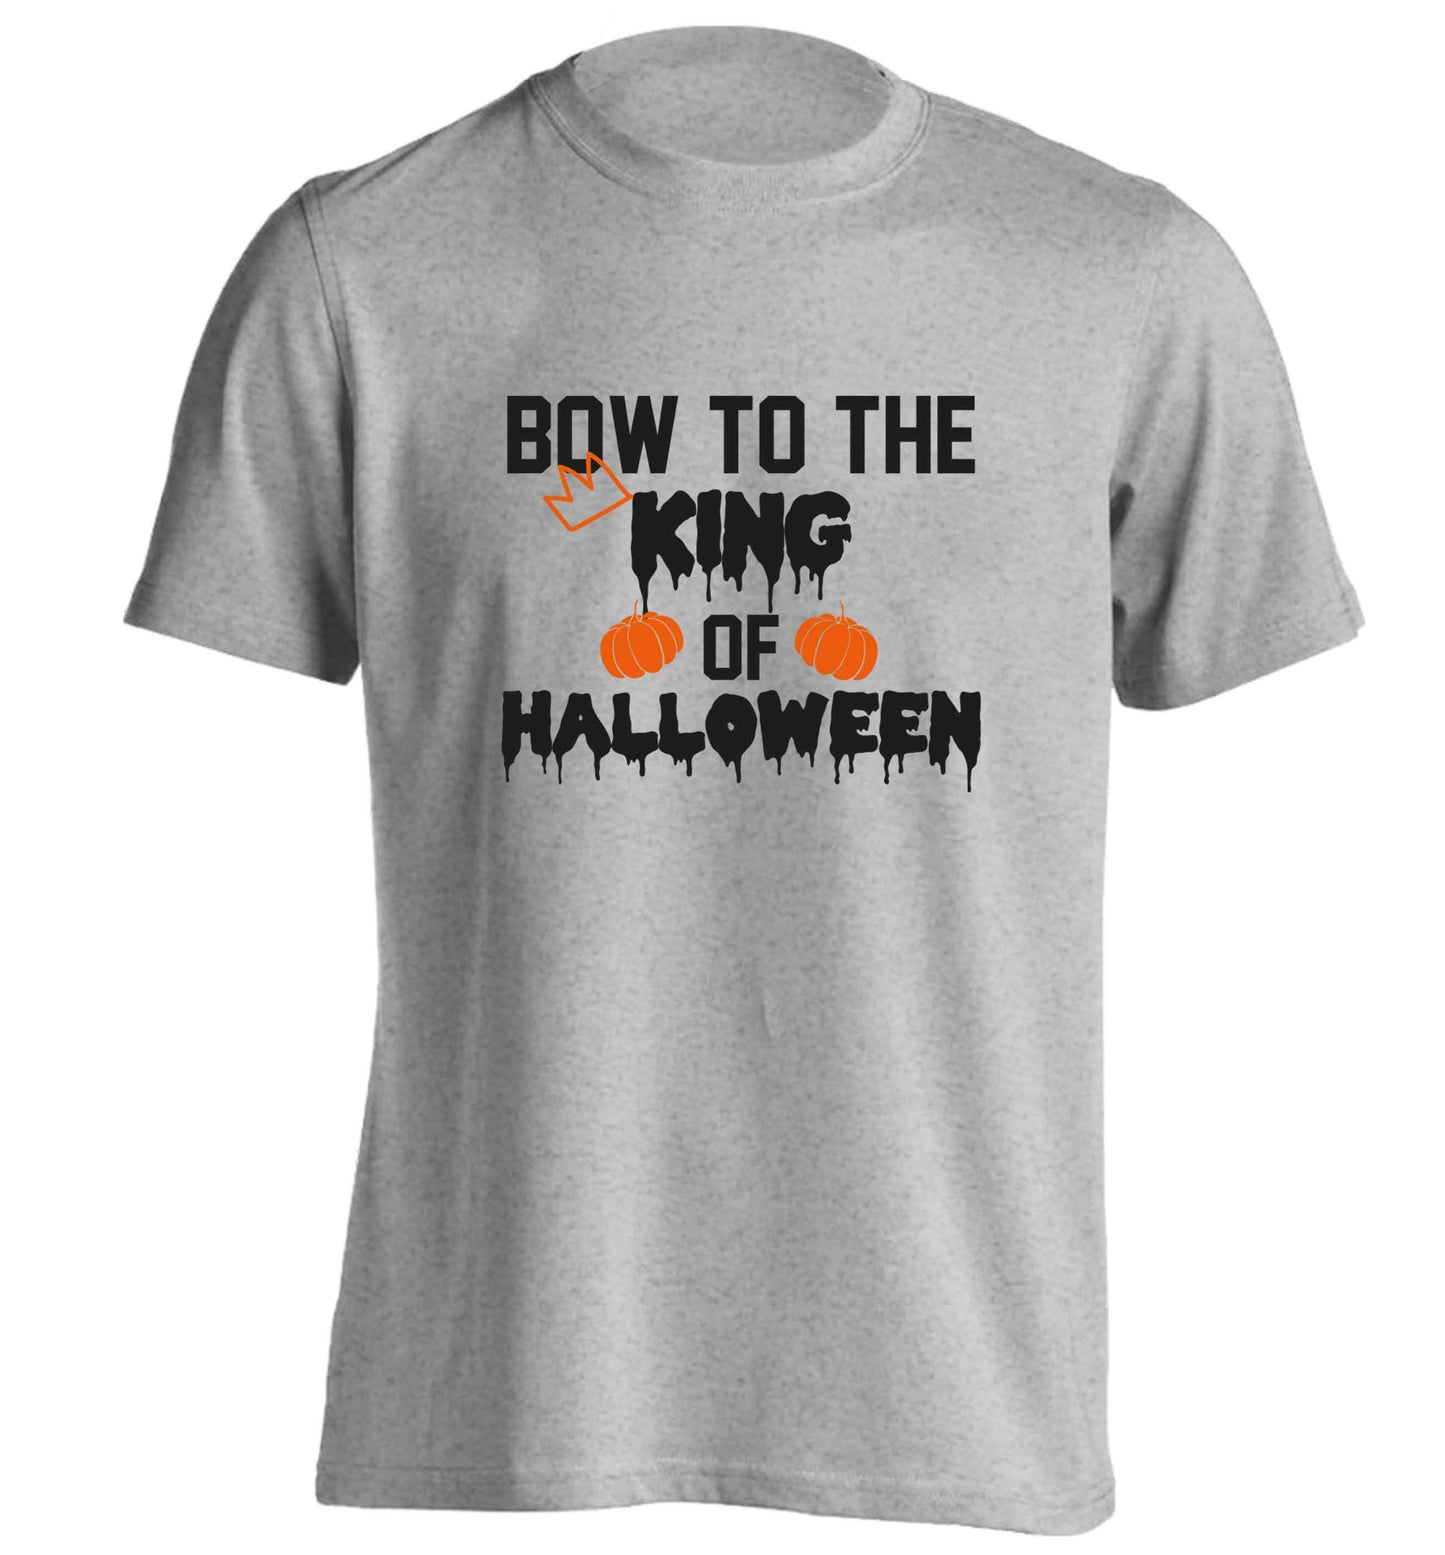 Bow to the King of halloween adults unisex grey Tshirt 2XL